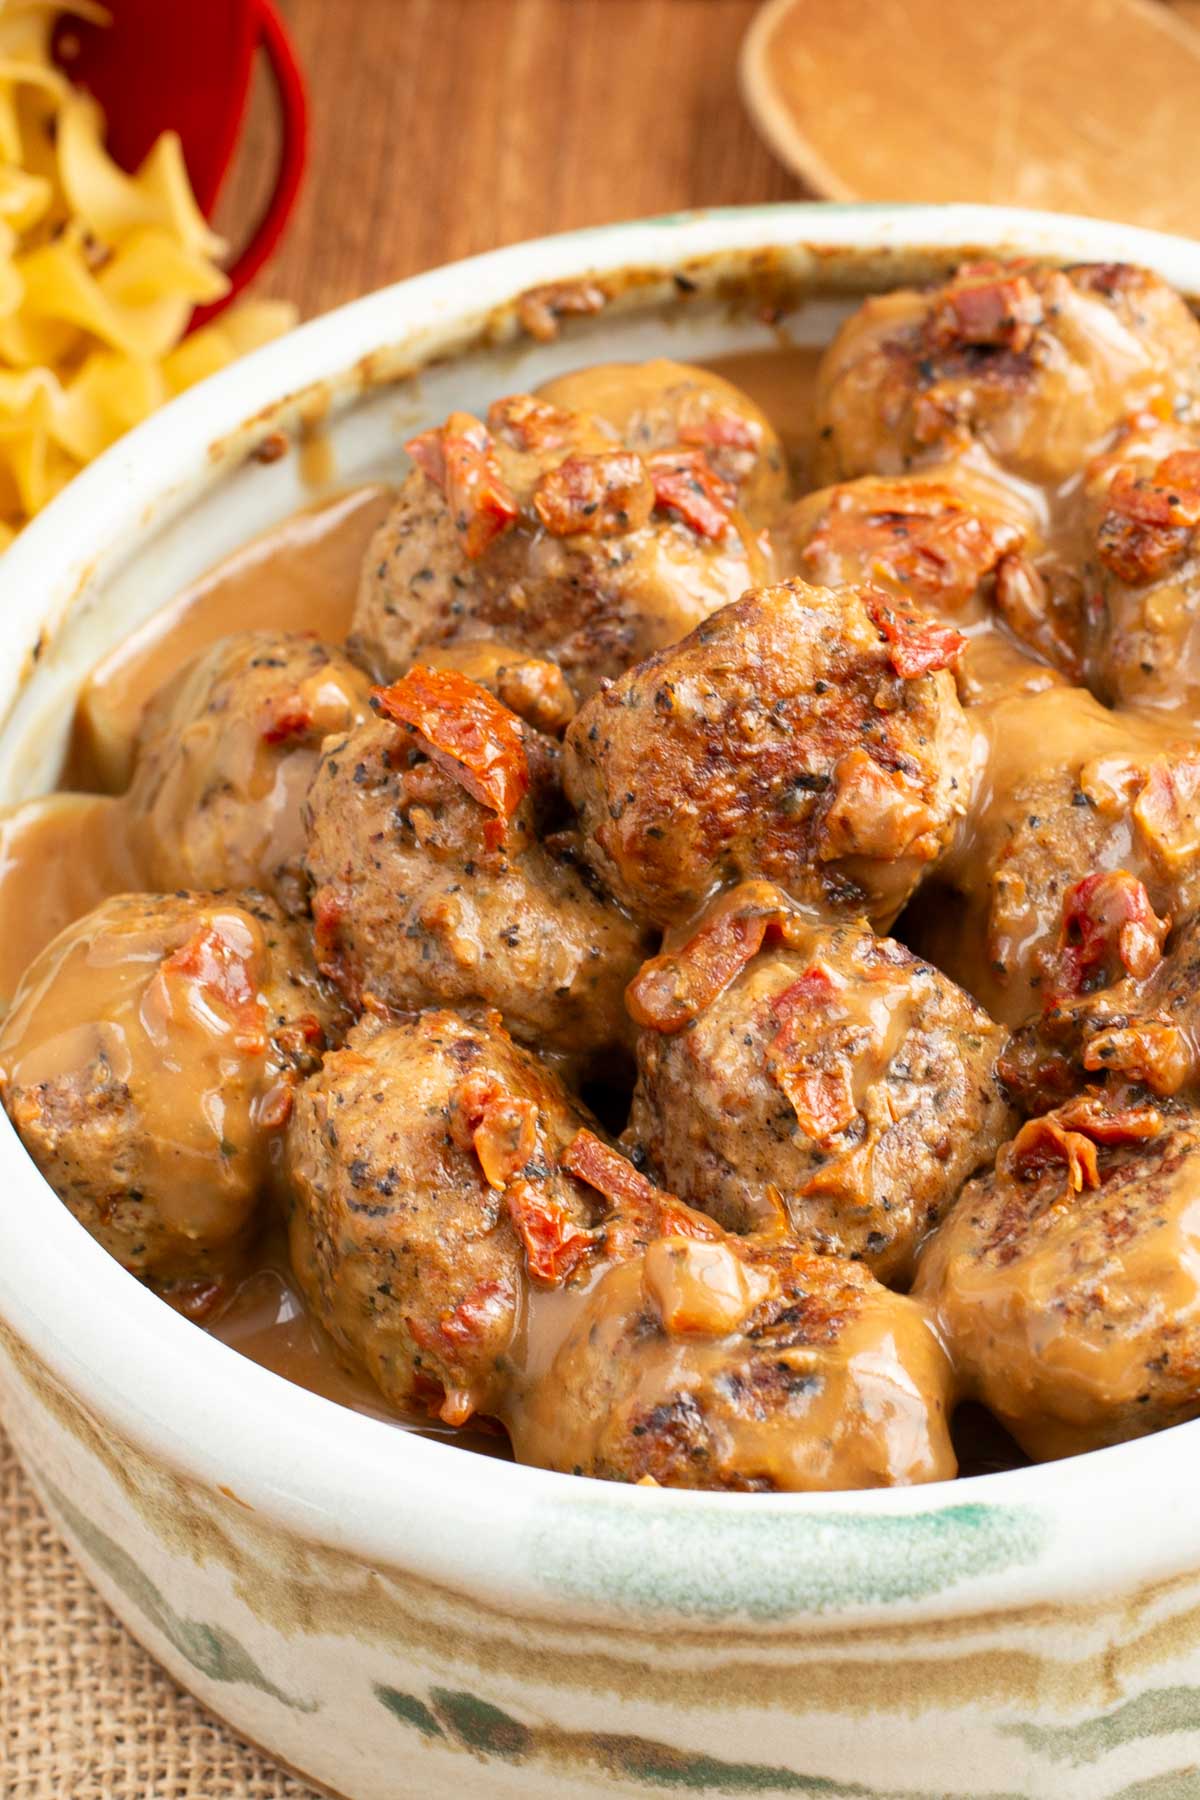 Serving bowl filled with turkey meatballs in a creamy sauce.